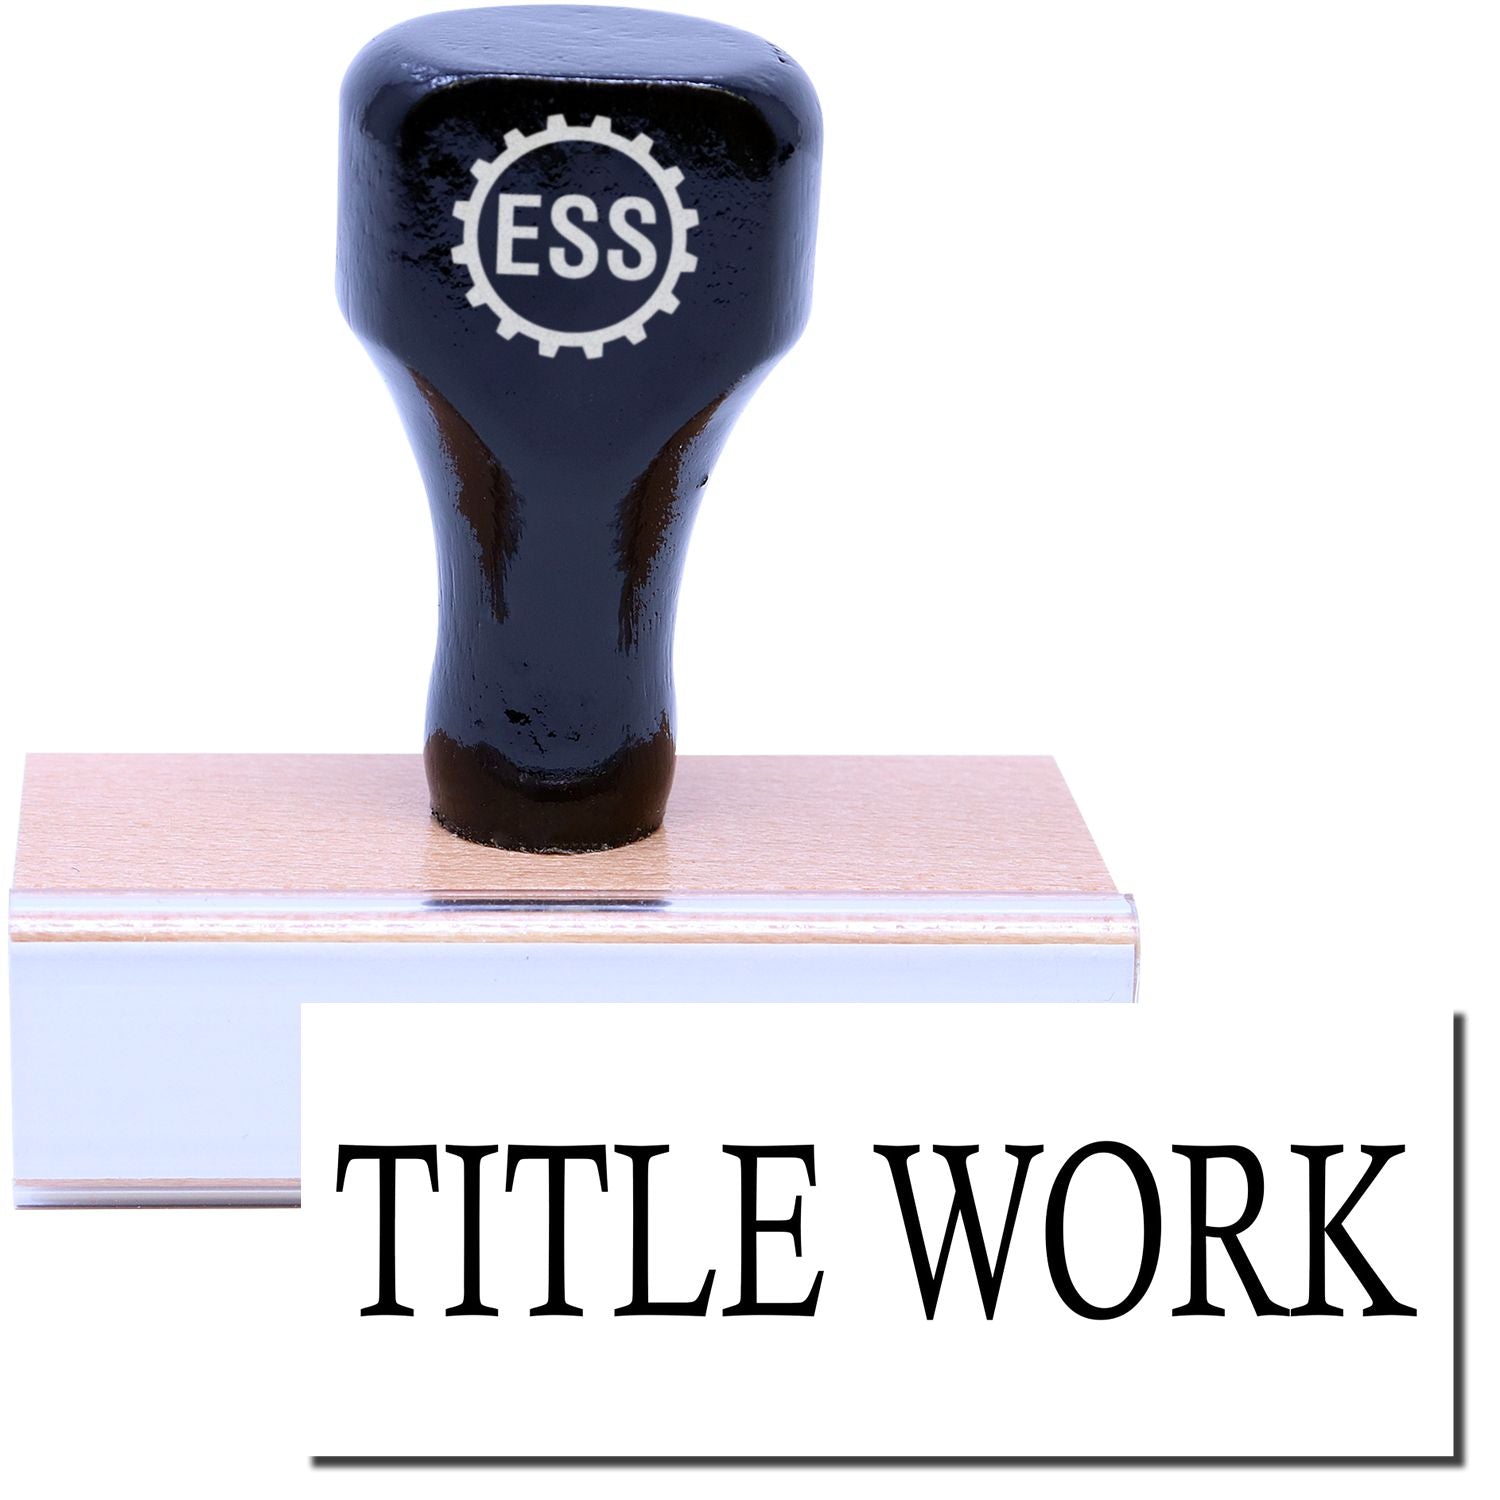 A stock office rubber stamp with a stamped image showing how the text "TITLE WORK" in a large font is displayed after stamping.